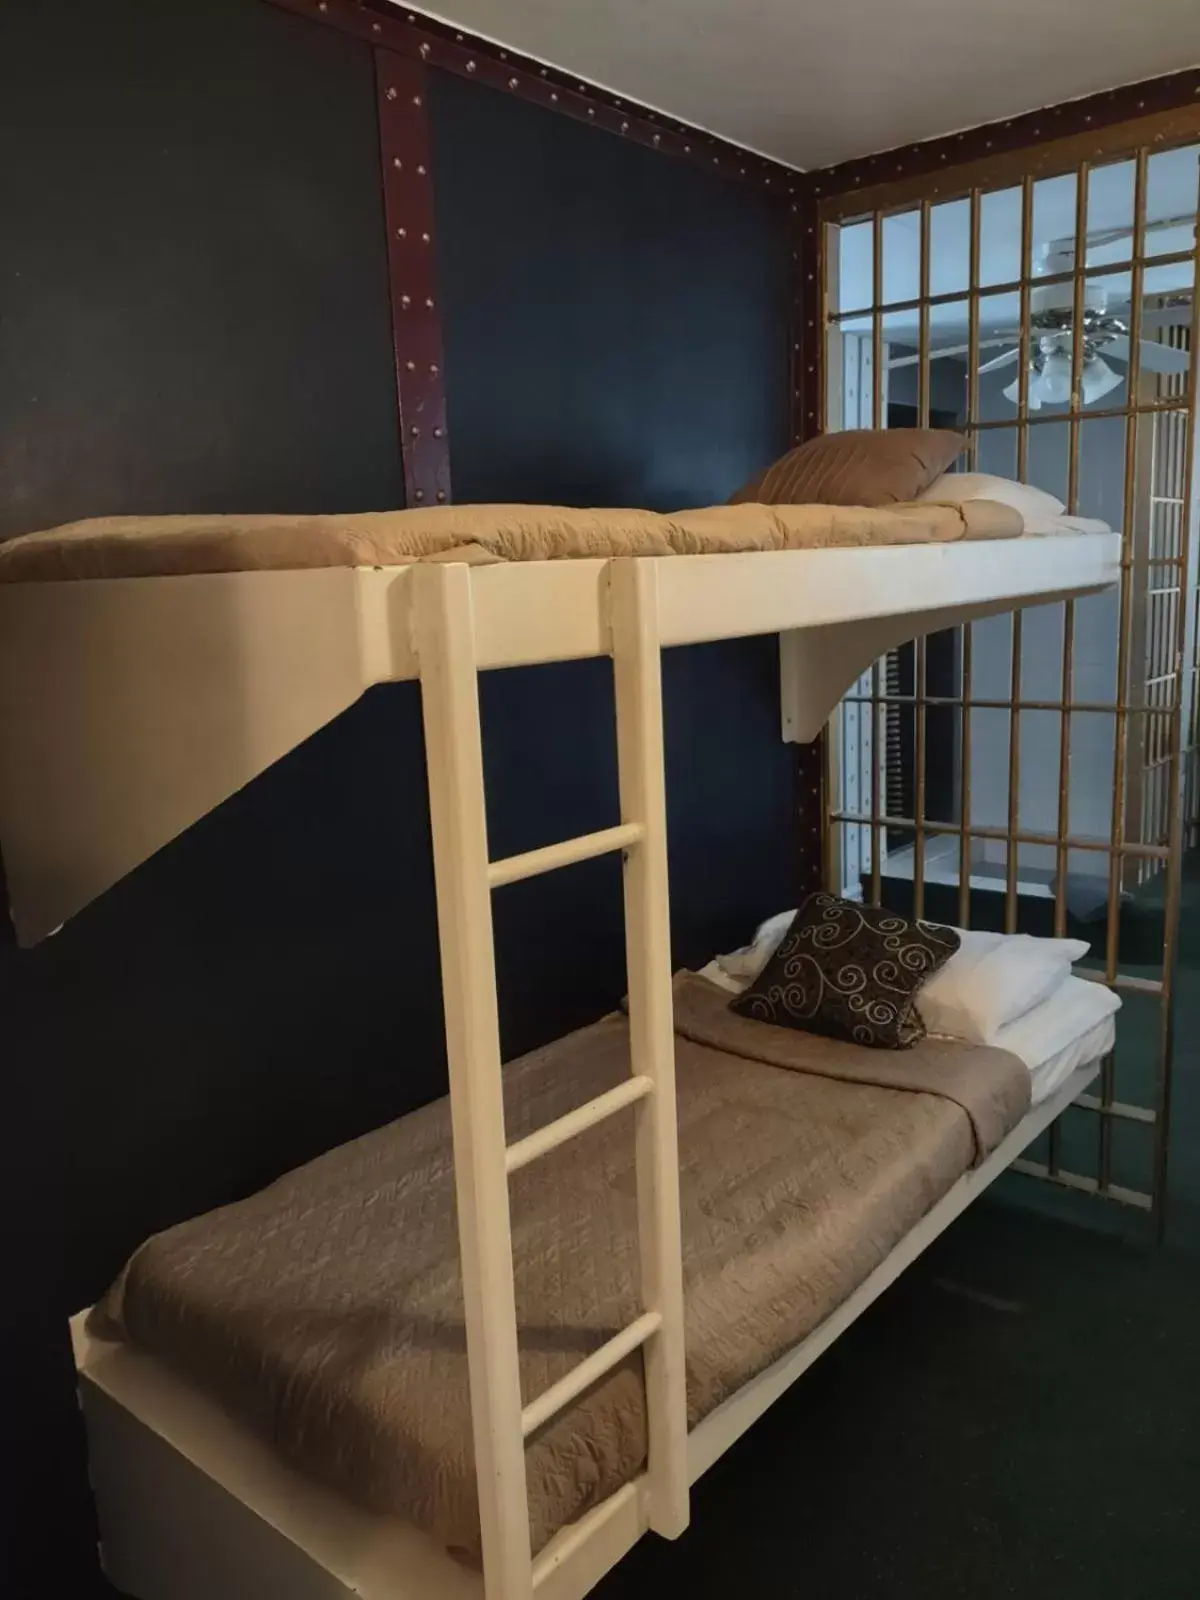 Bunk Bed in The King George Inn